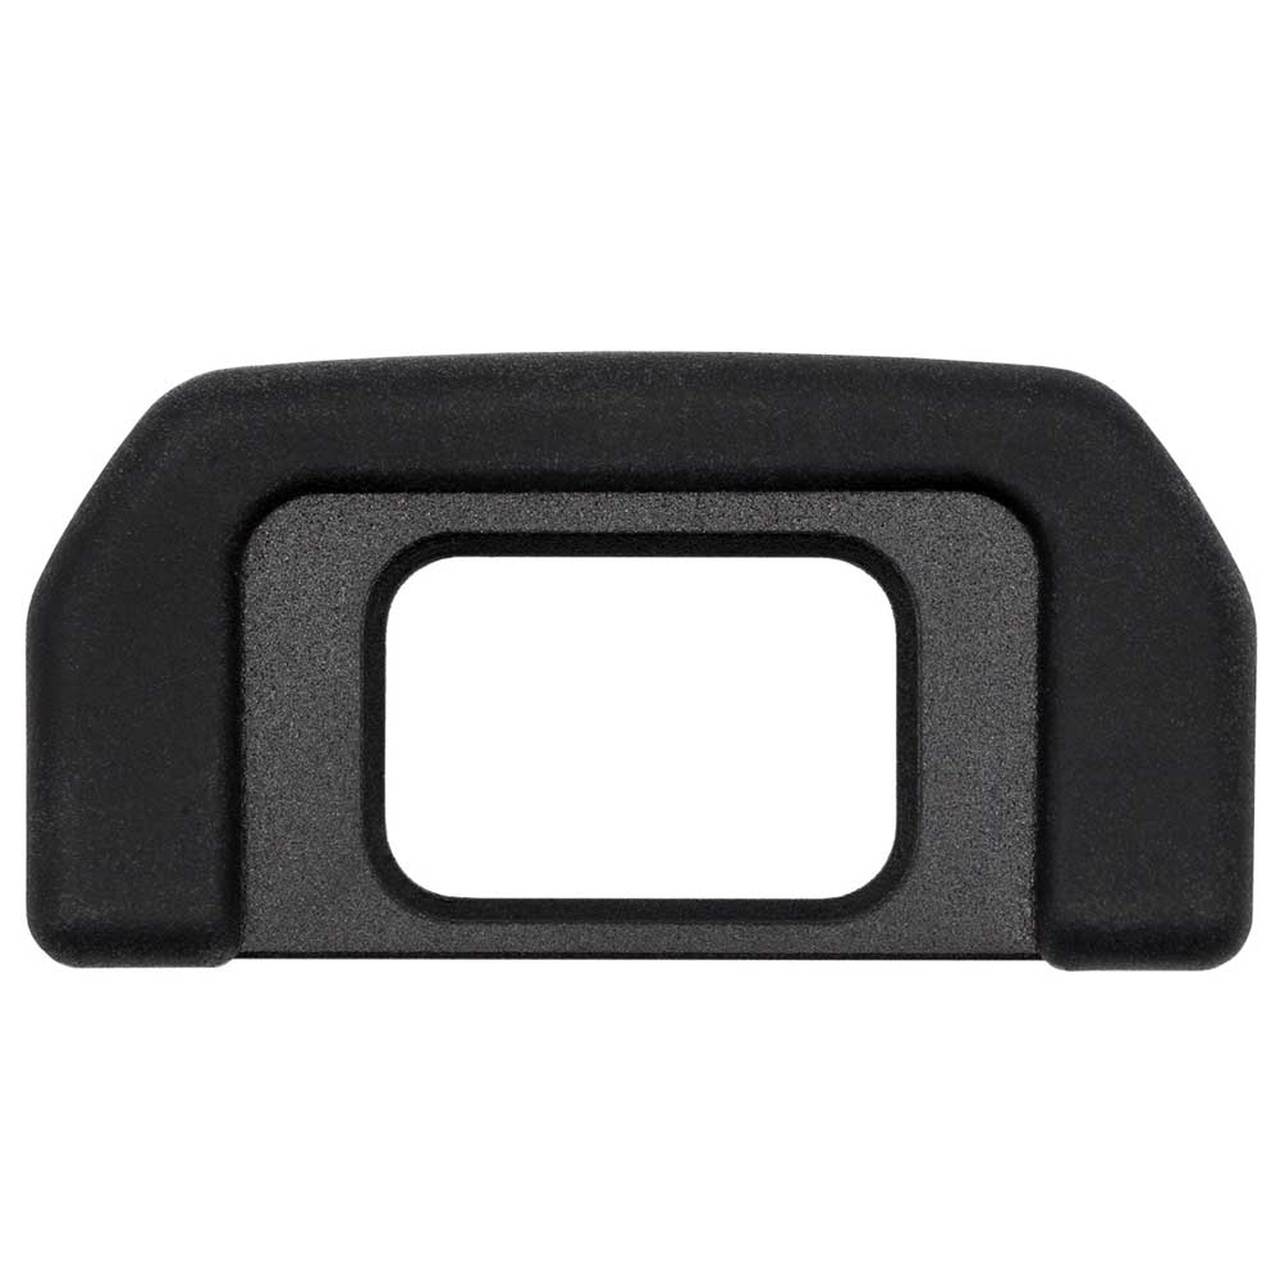 Promaster 8854 Replacement Eye Cup for Nikon DK28